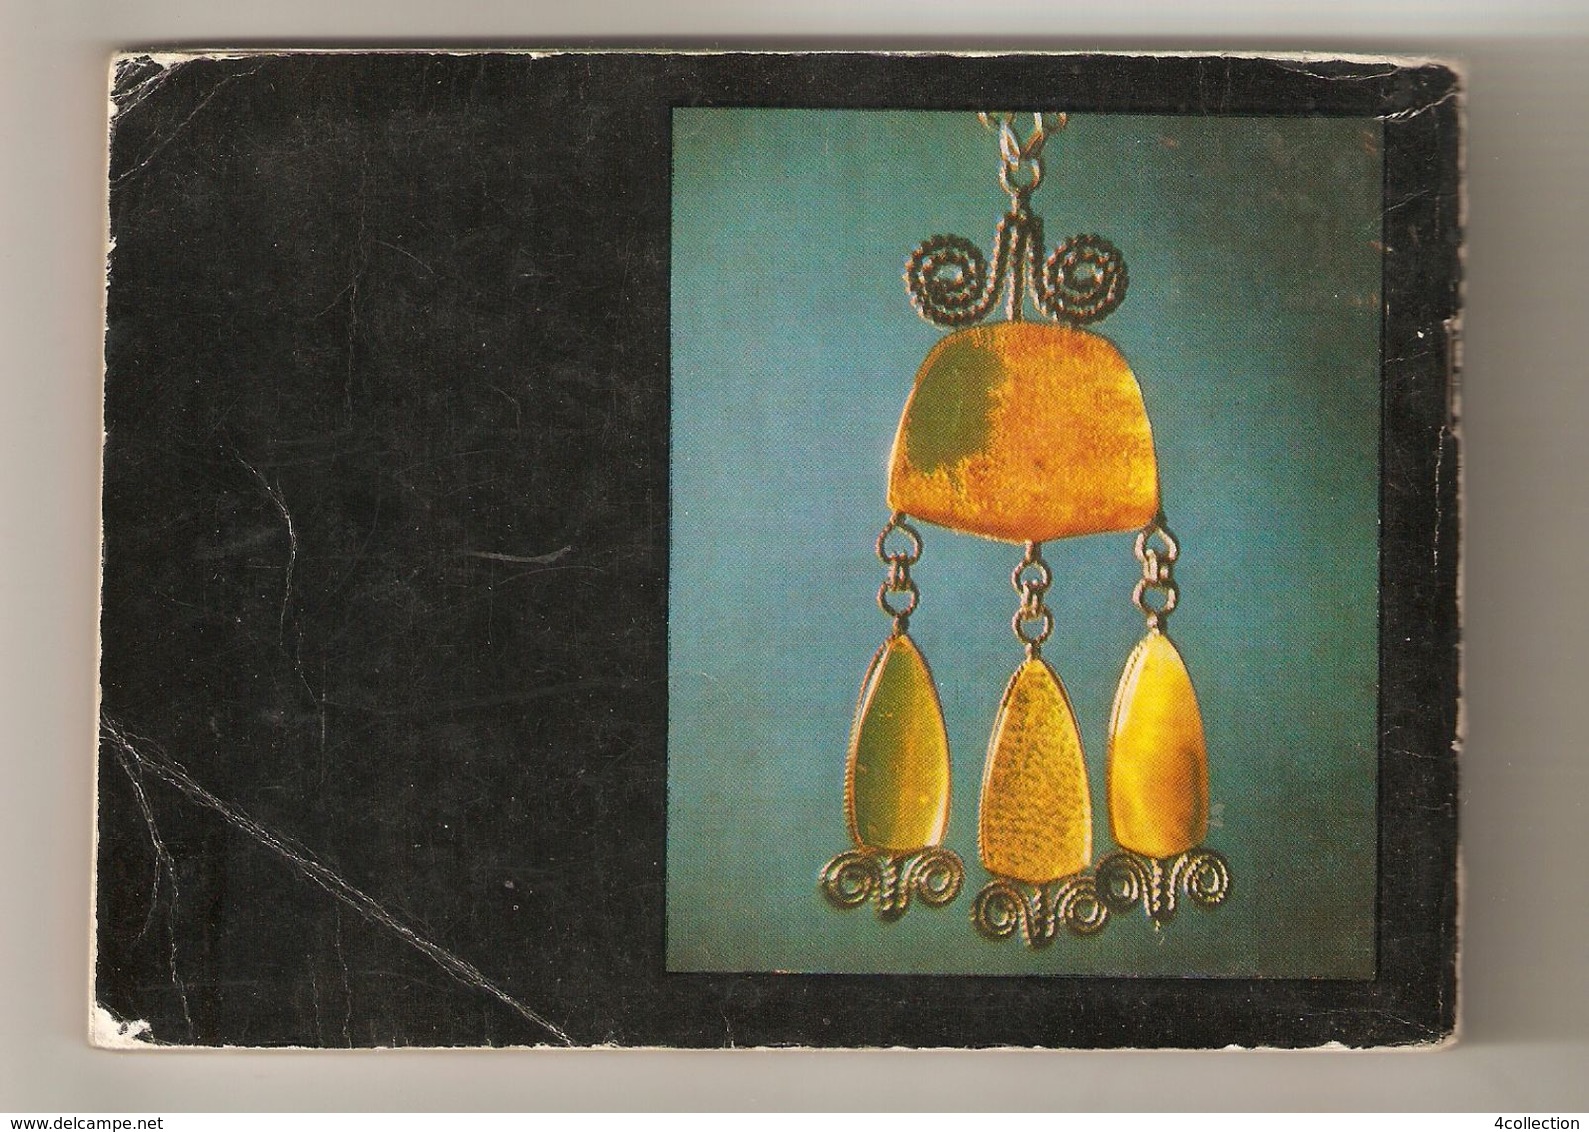 k2 USSR Soviet Lithuania Mintis 1975 About The Palanga Museum of Amber illustrated book guide in Russian